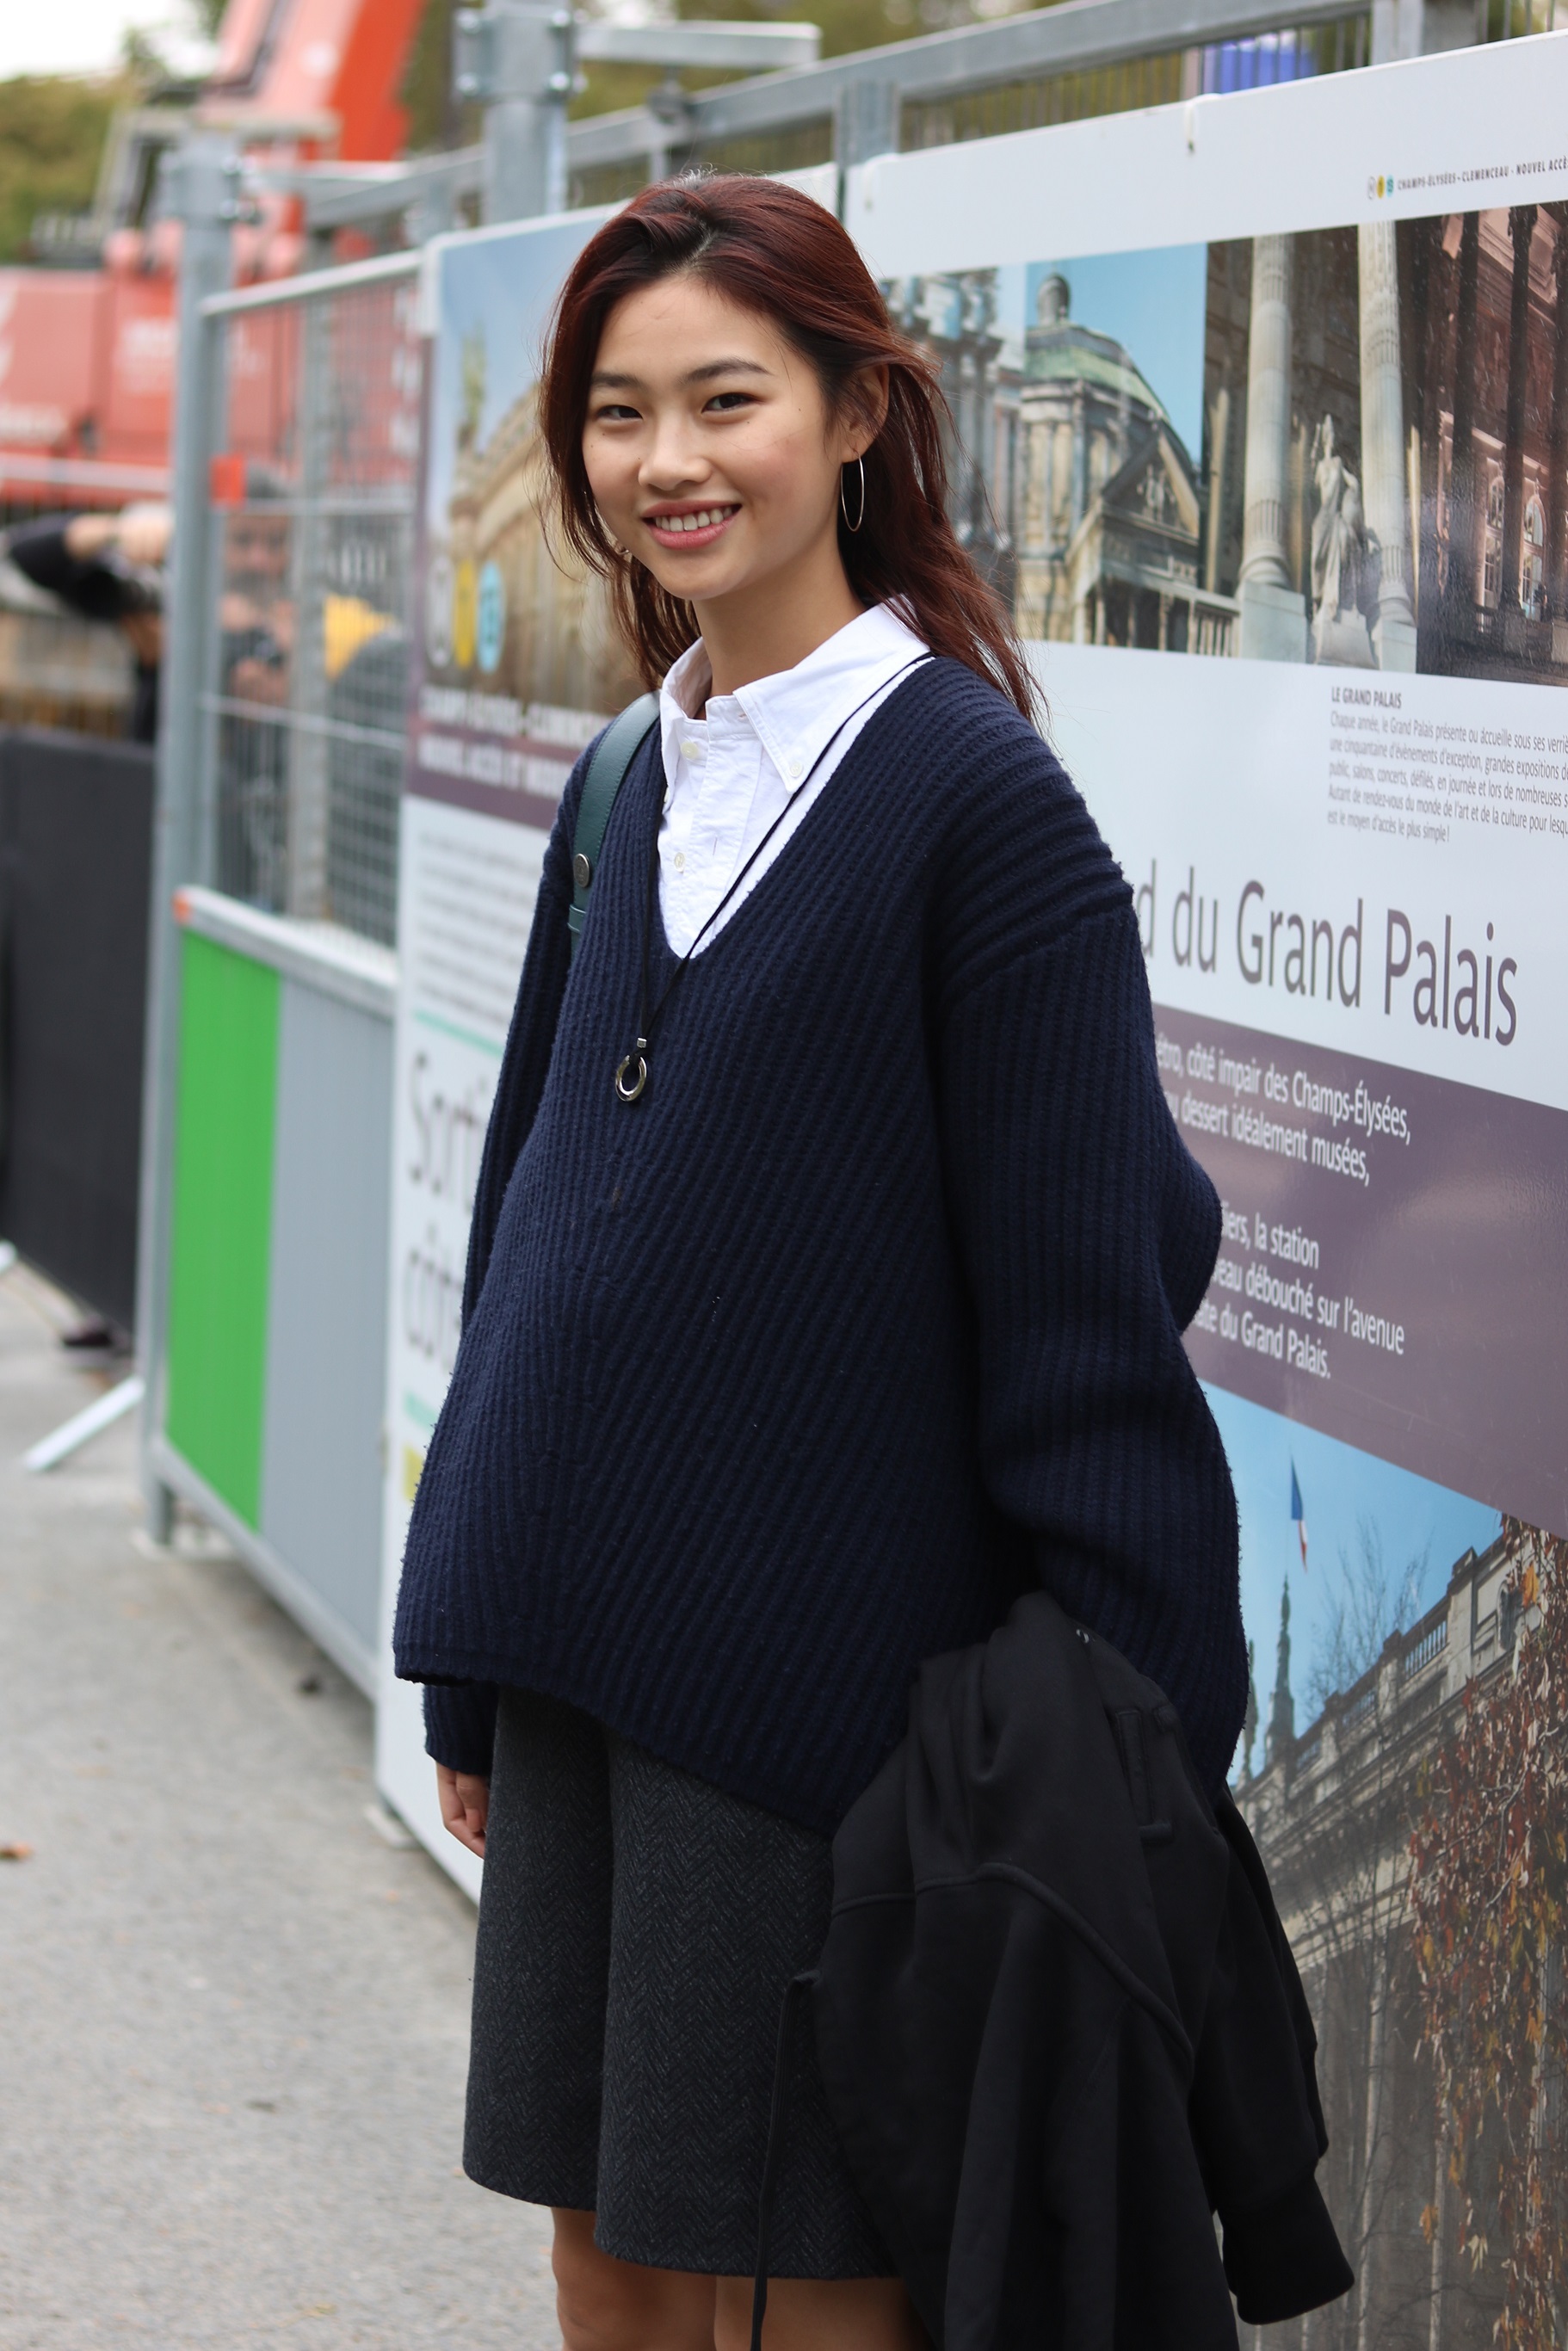 HoYeon Jung at the Chanel Show During Paris Fashion Week in 2019